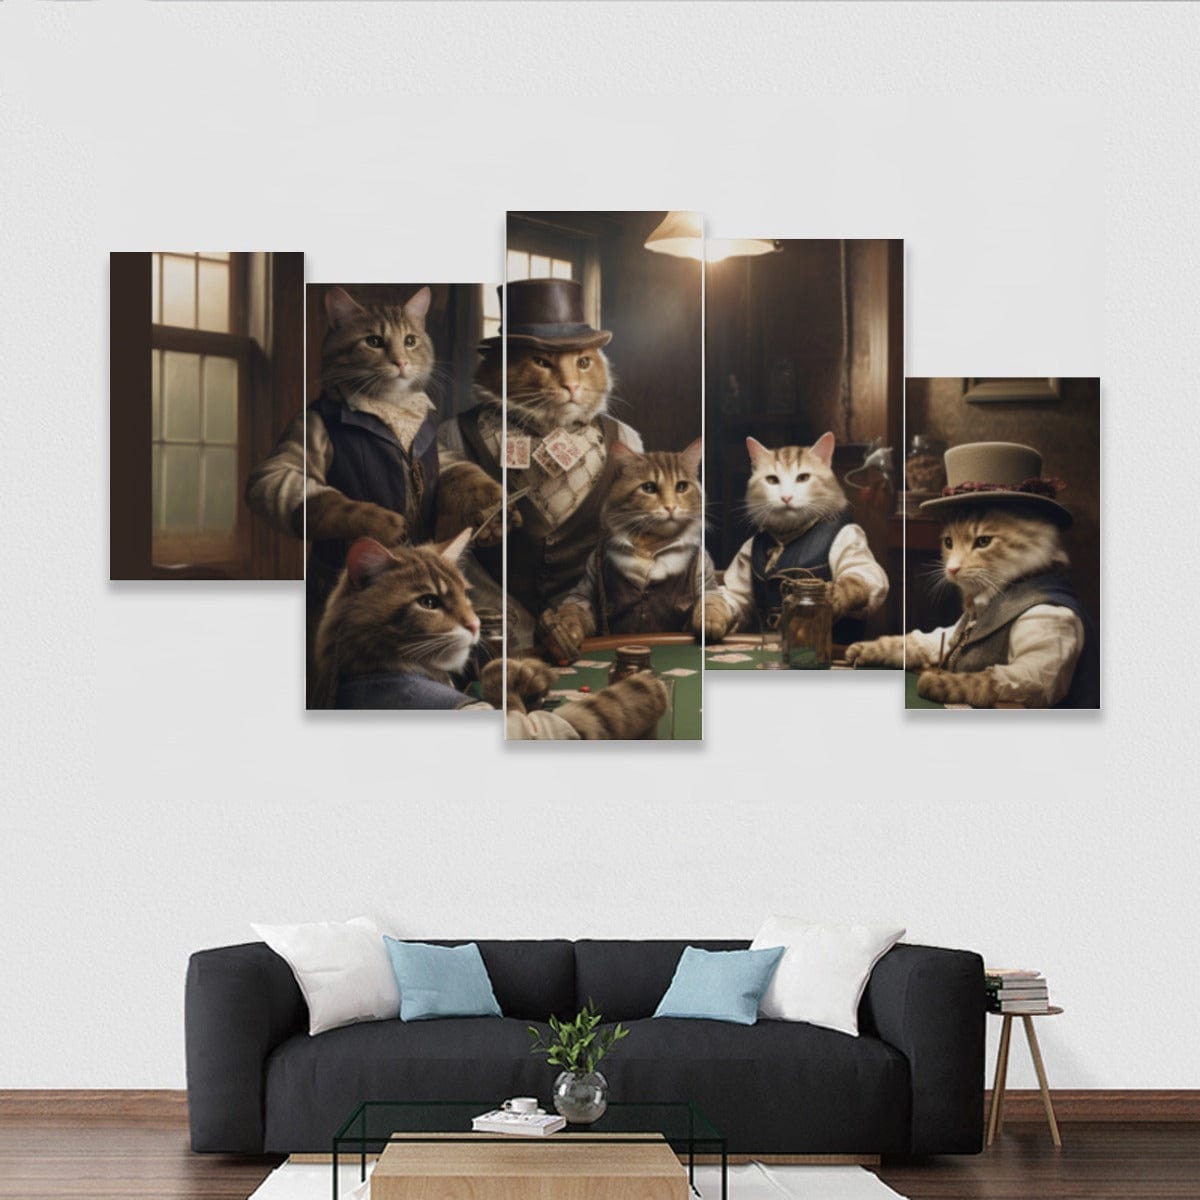 Yoycol M / White Cats Playing Poker - Five-piece Framed Murals